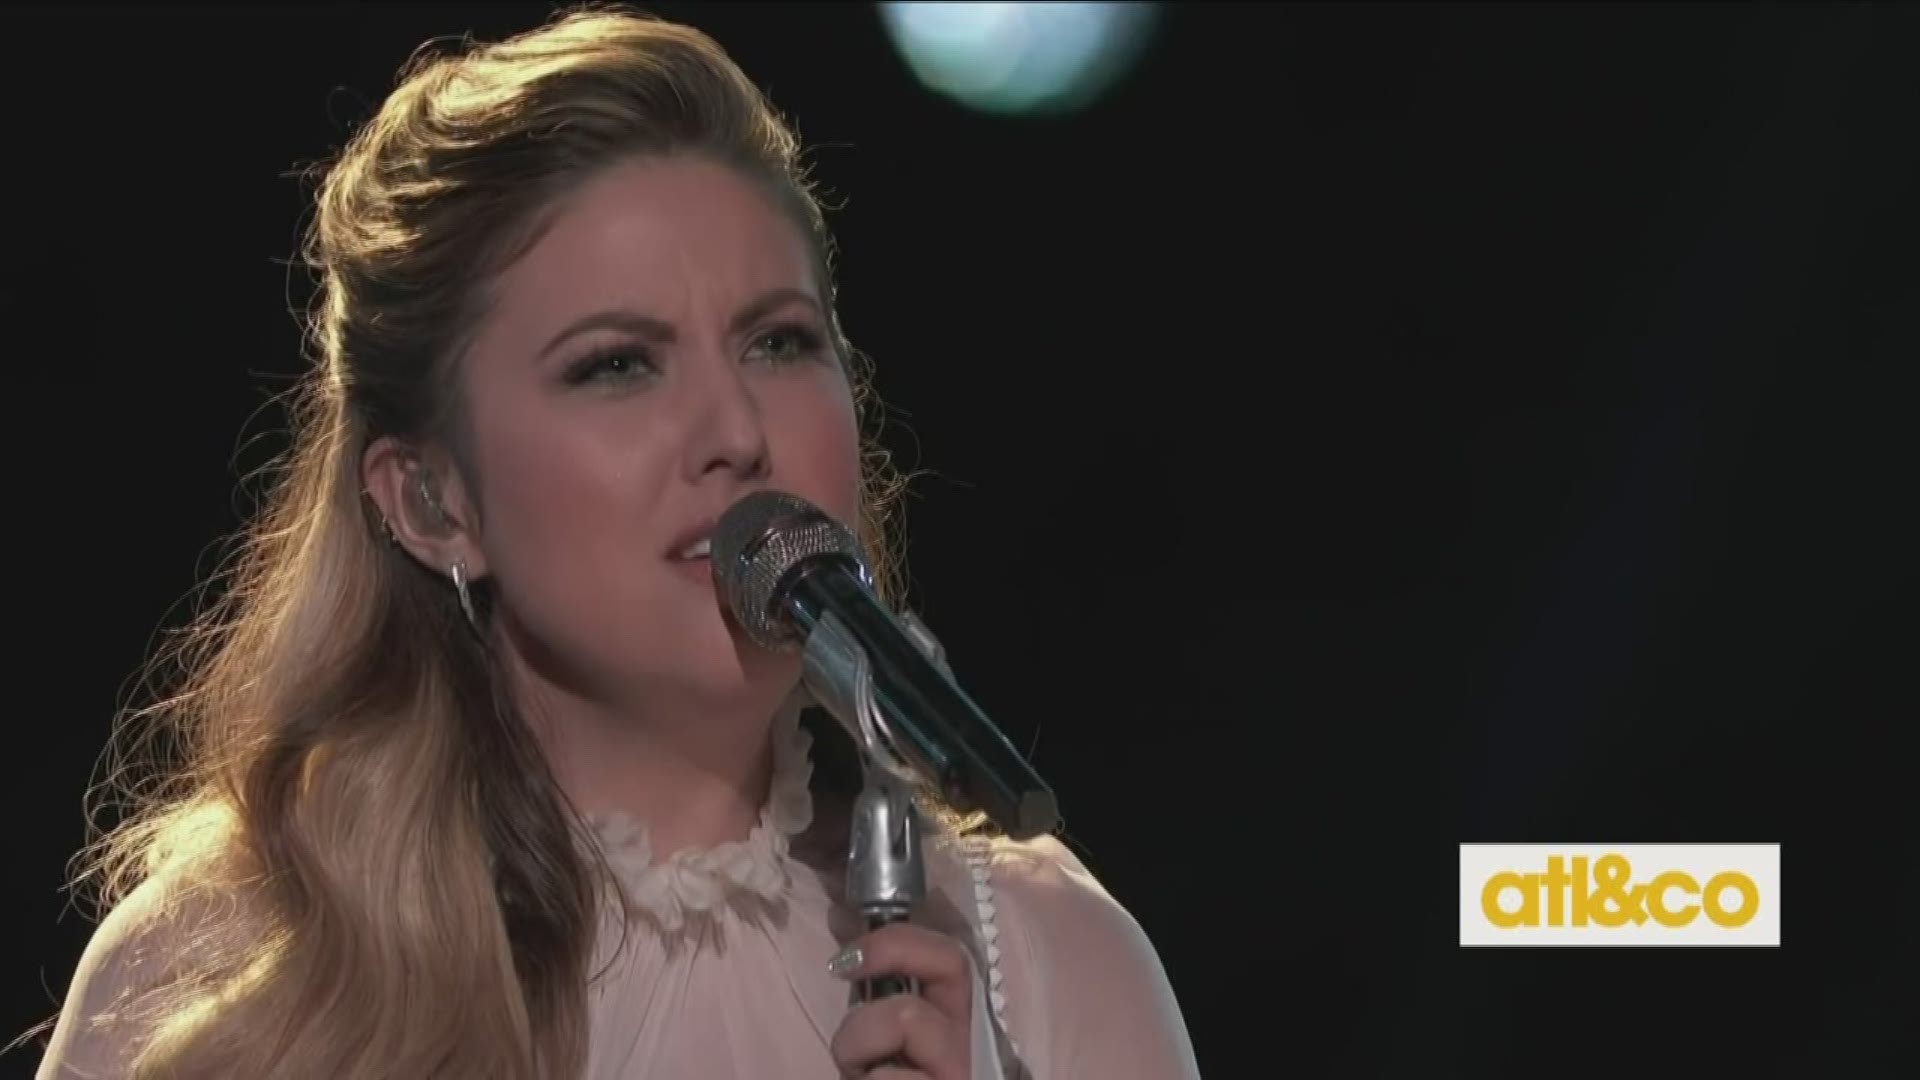 Congrats to Team Legend's Maelyn Jarmon, winner of 'The Voice'